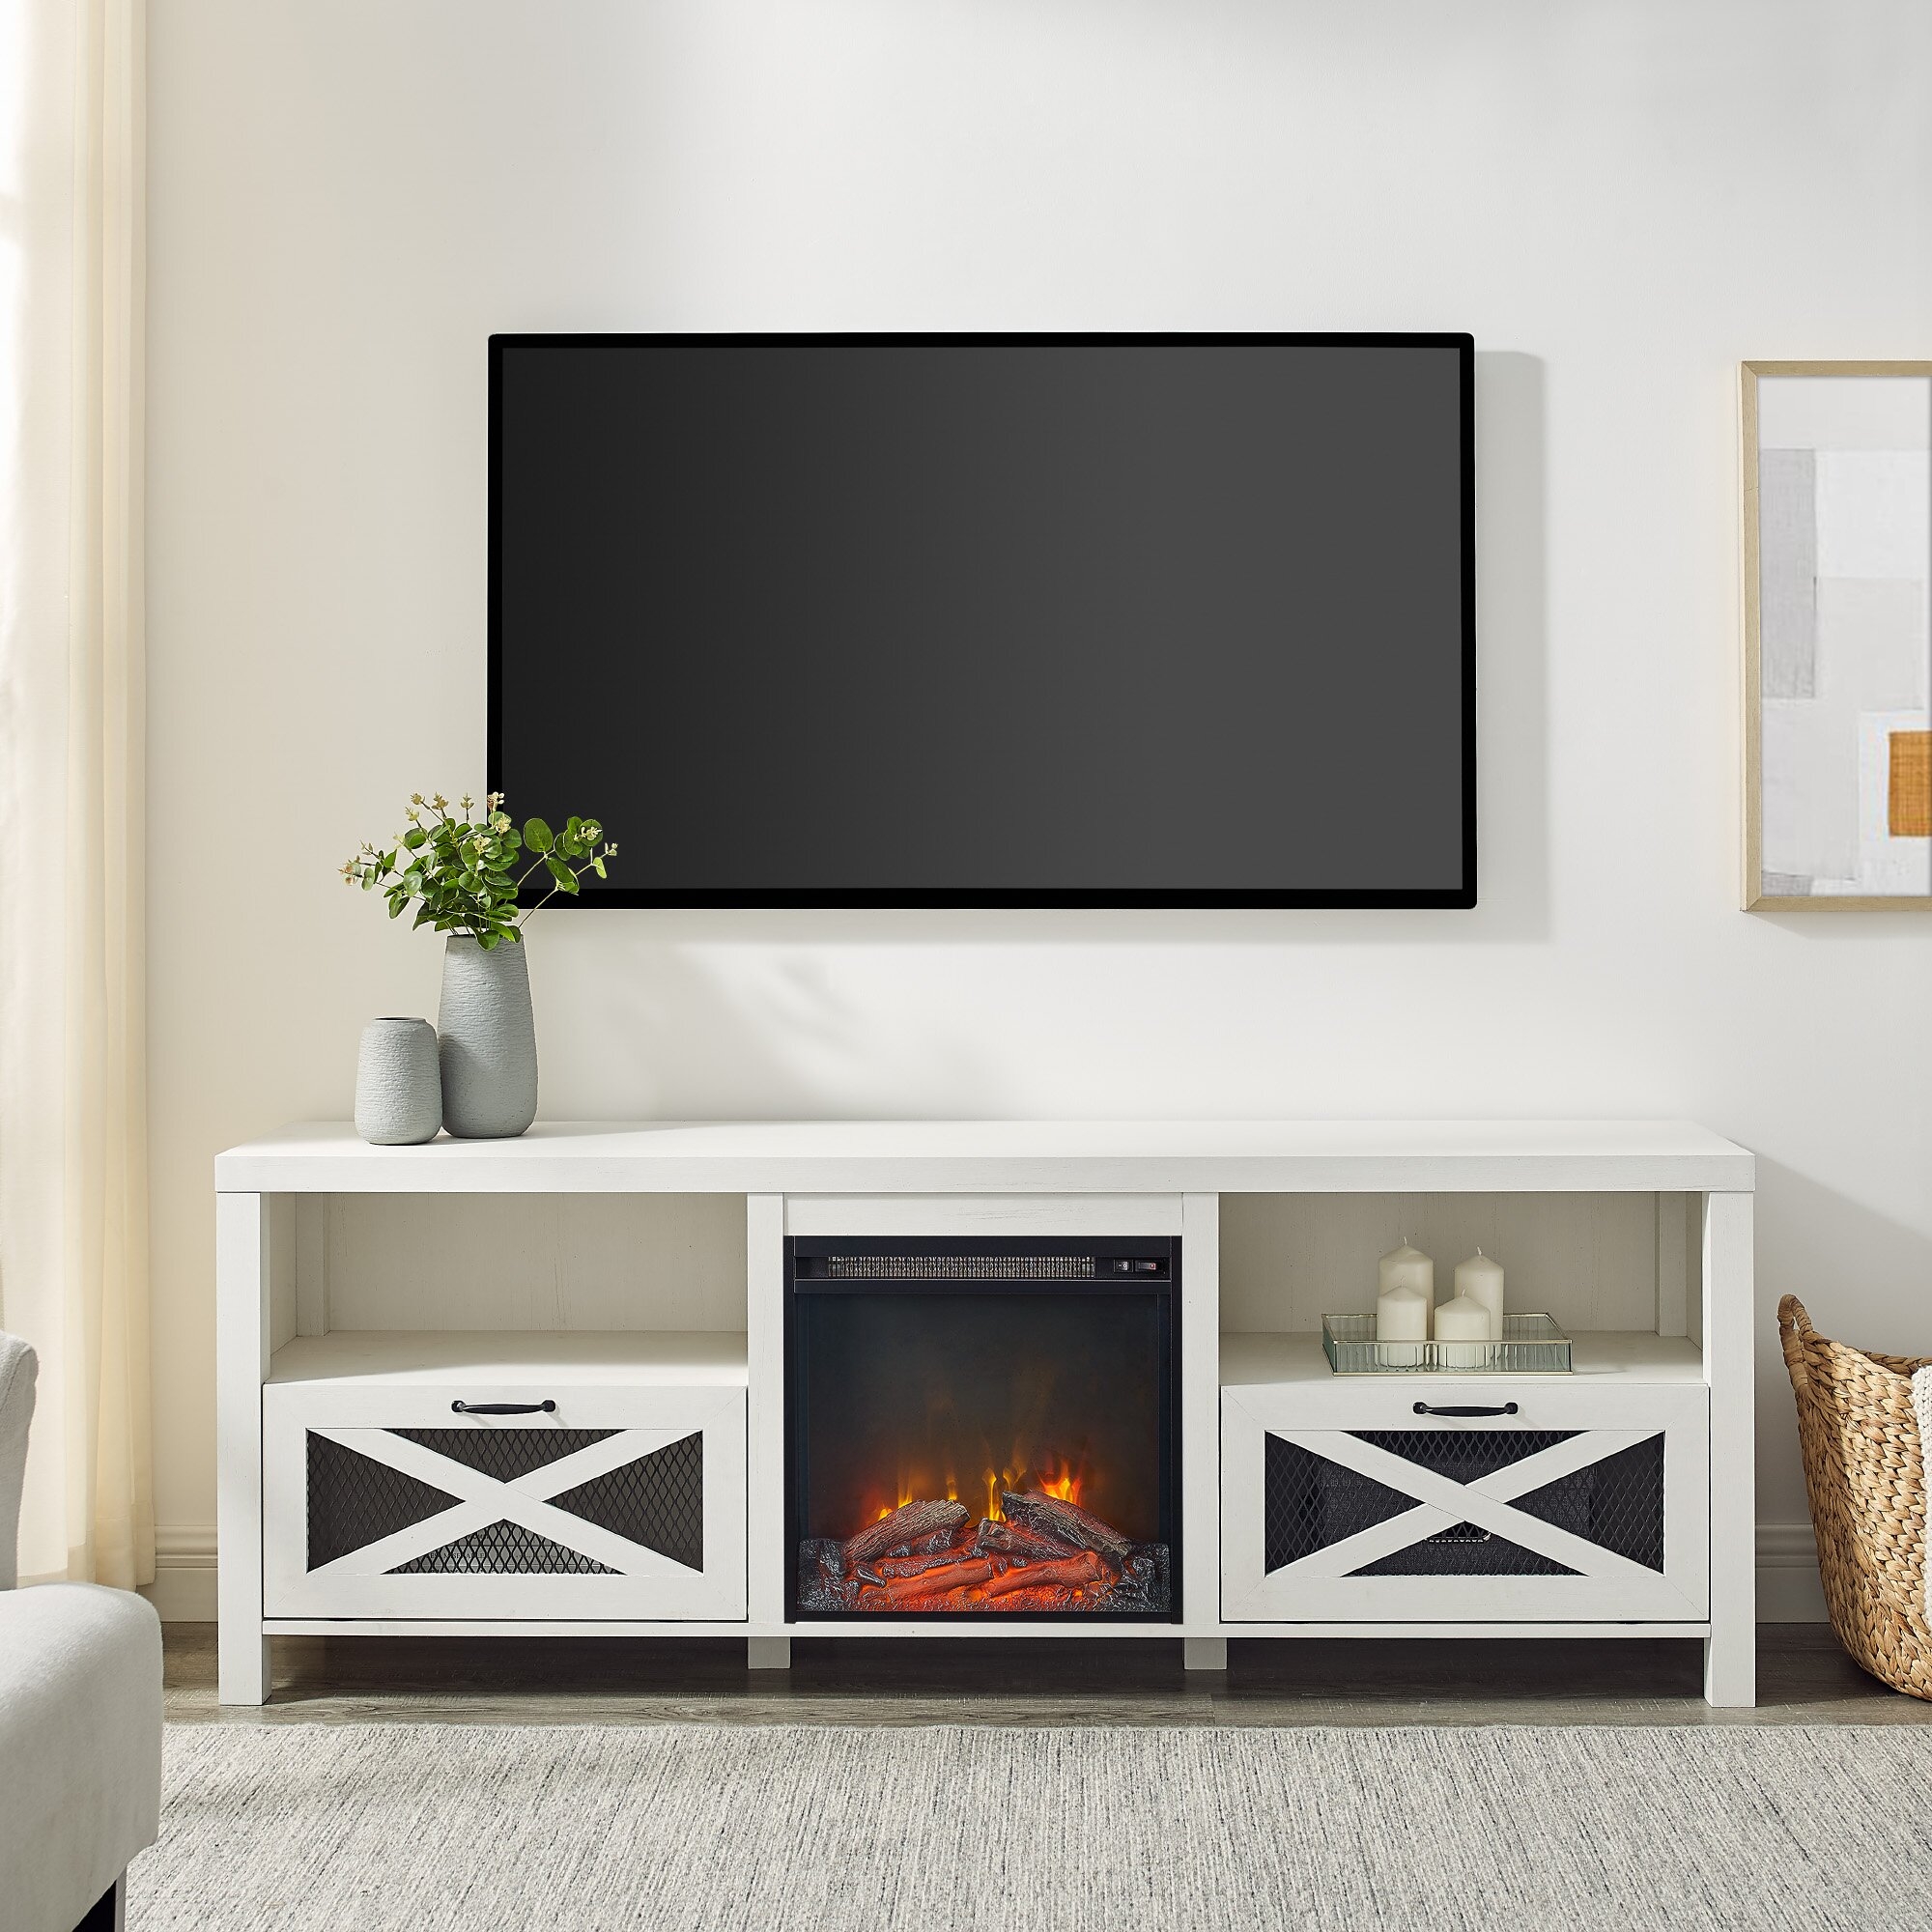 Tansey TV Stand for TVs up to 78" with Fireplace Included - Image 1